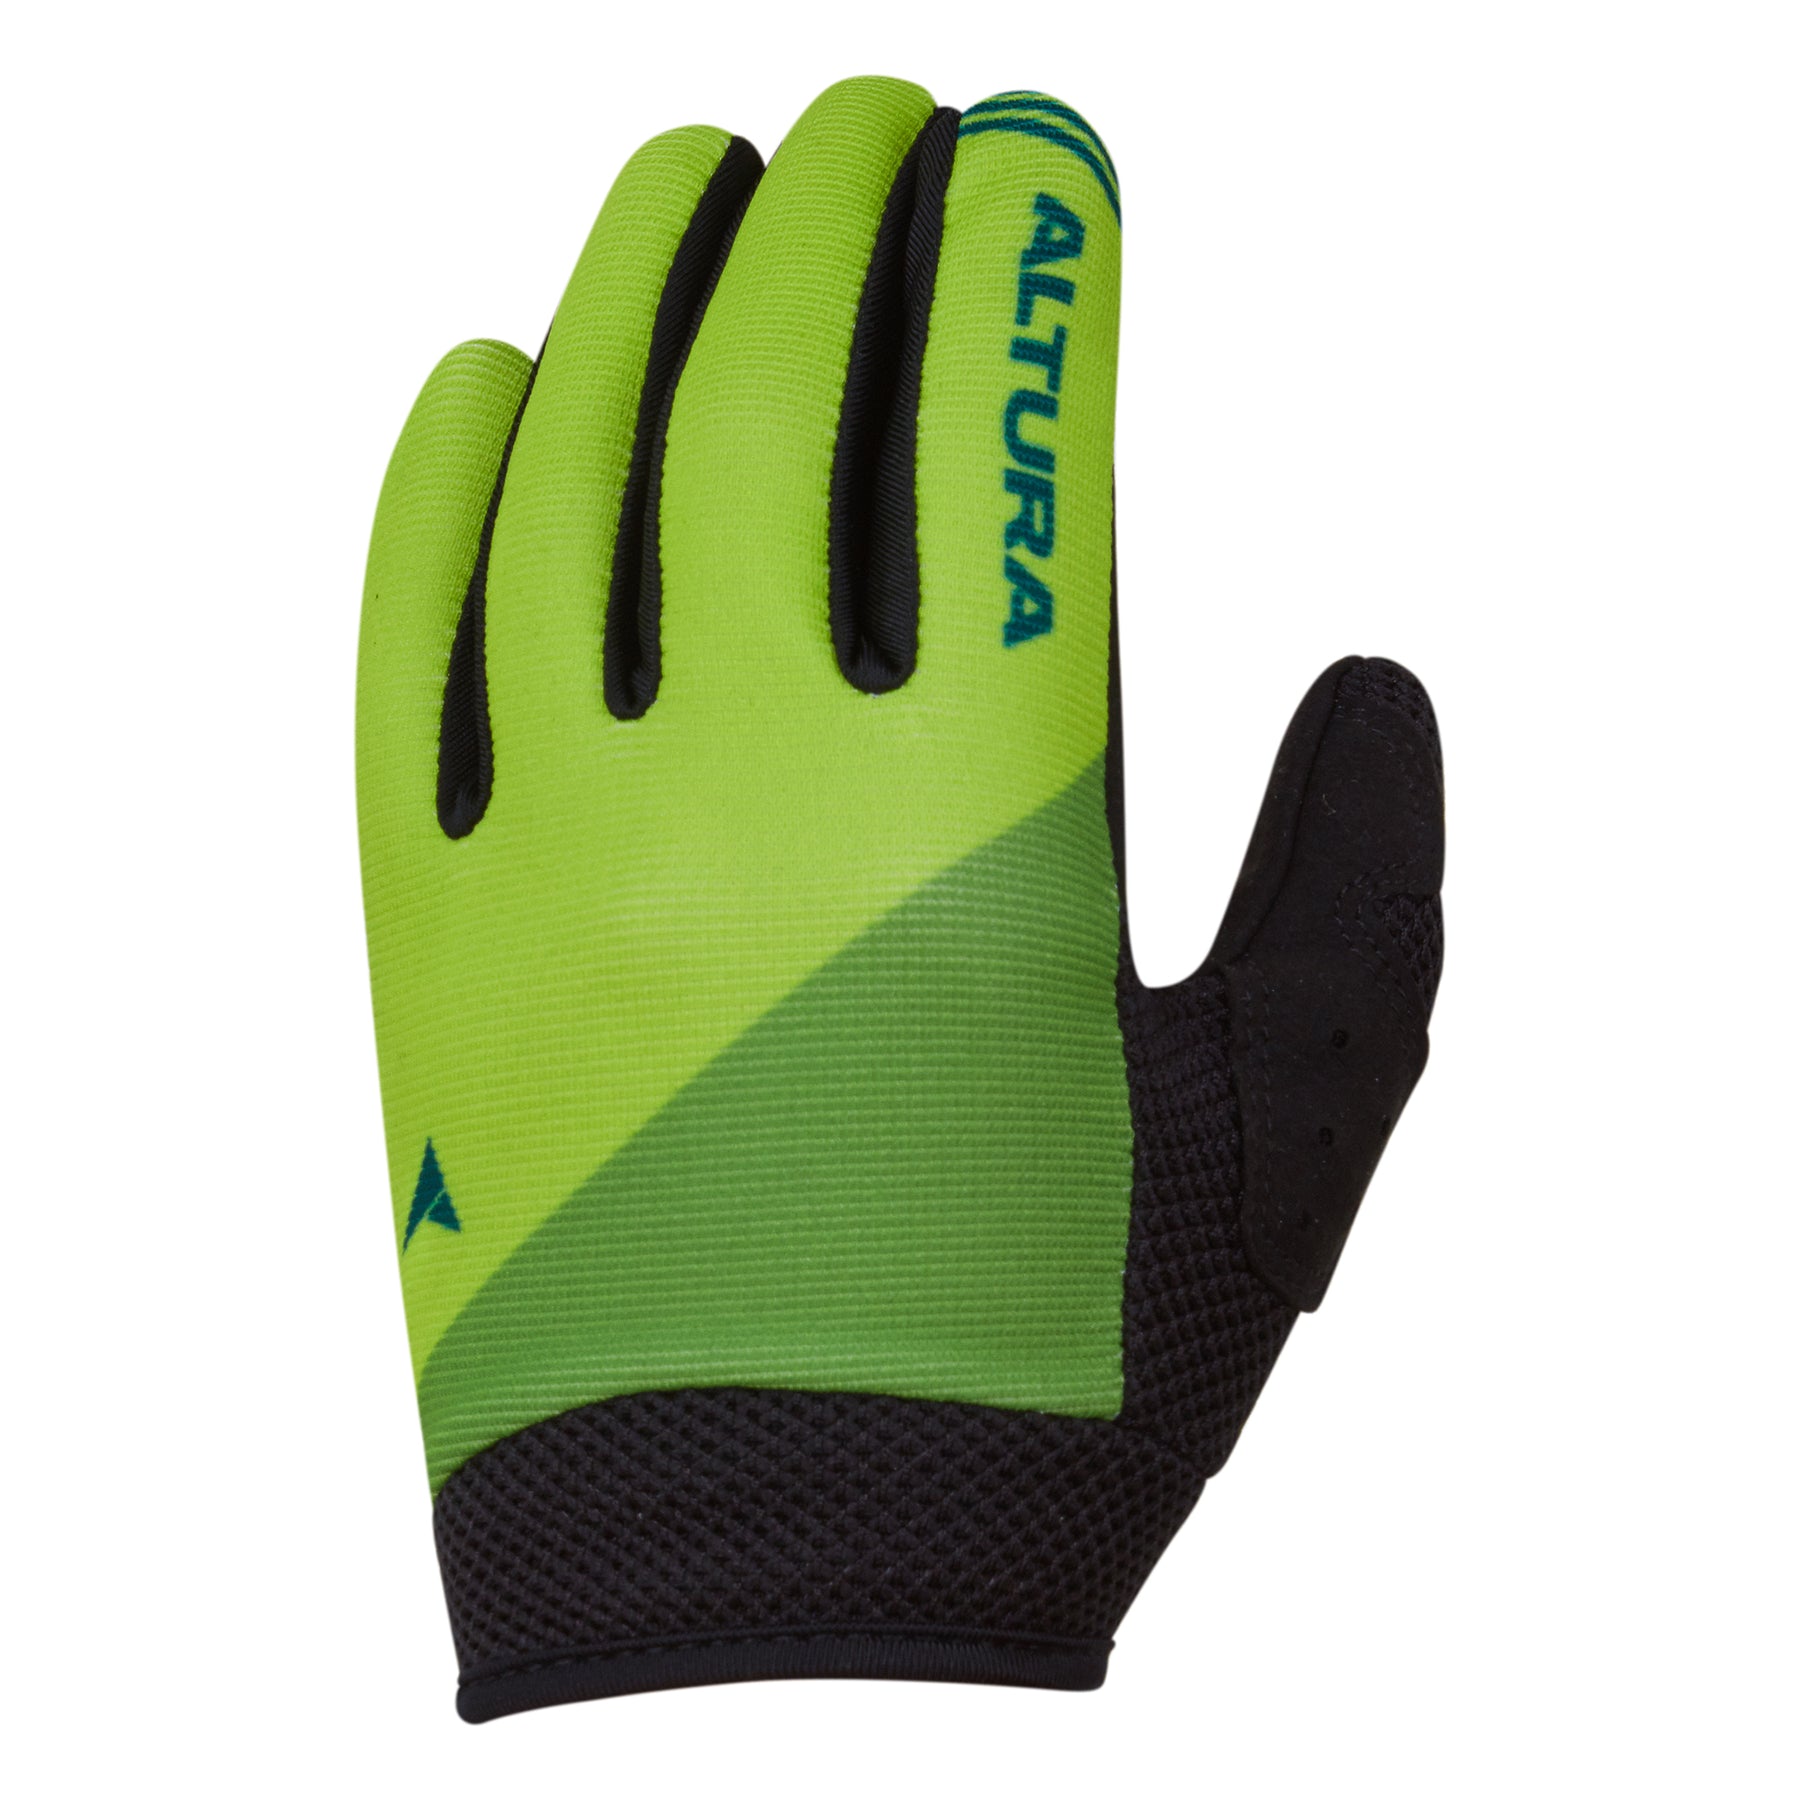 Altura Kid's Spark Gloves Lime 5-6 YEARS